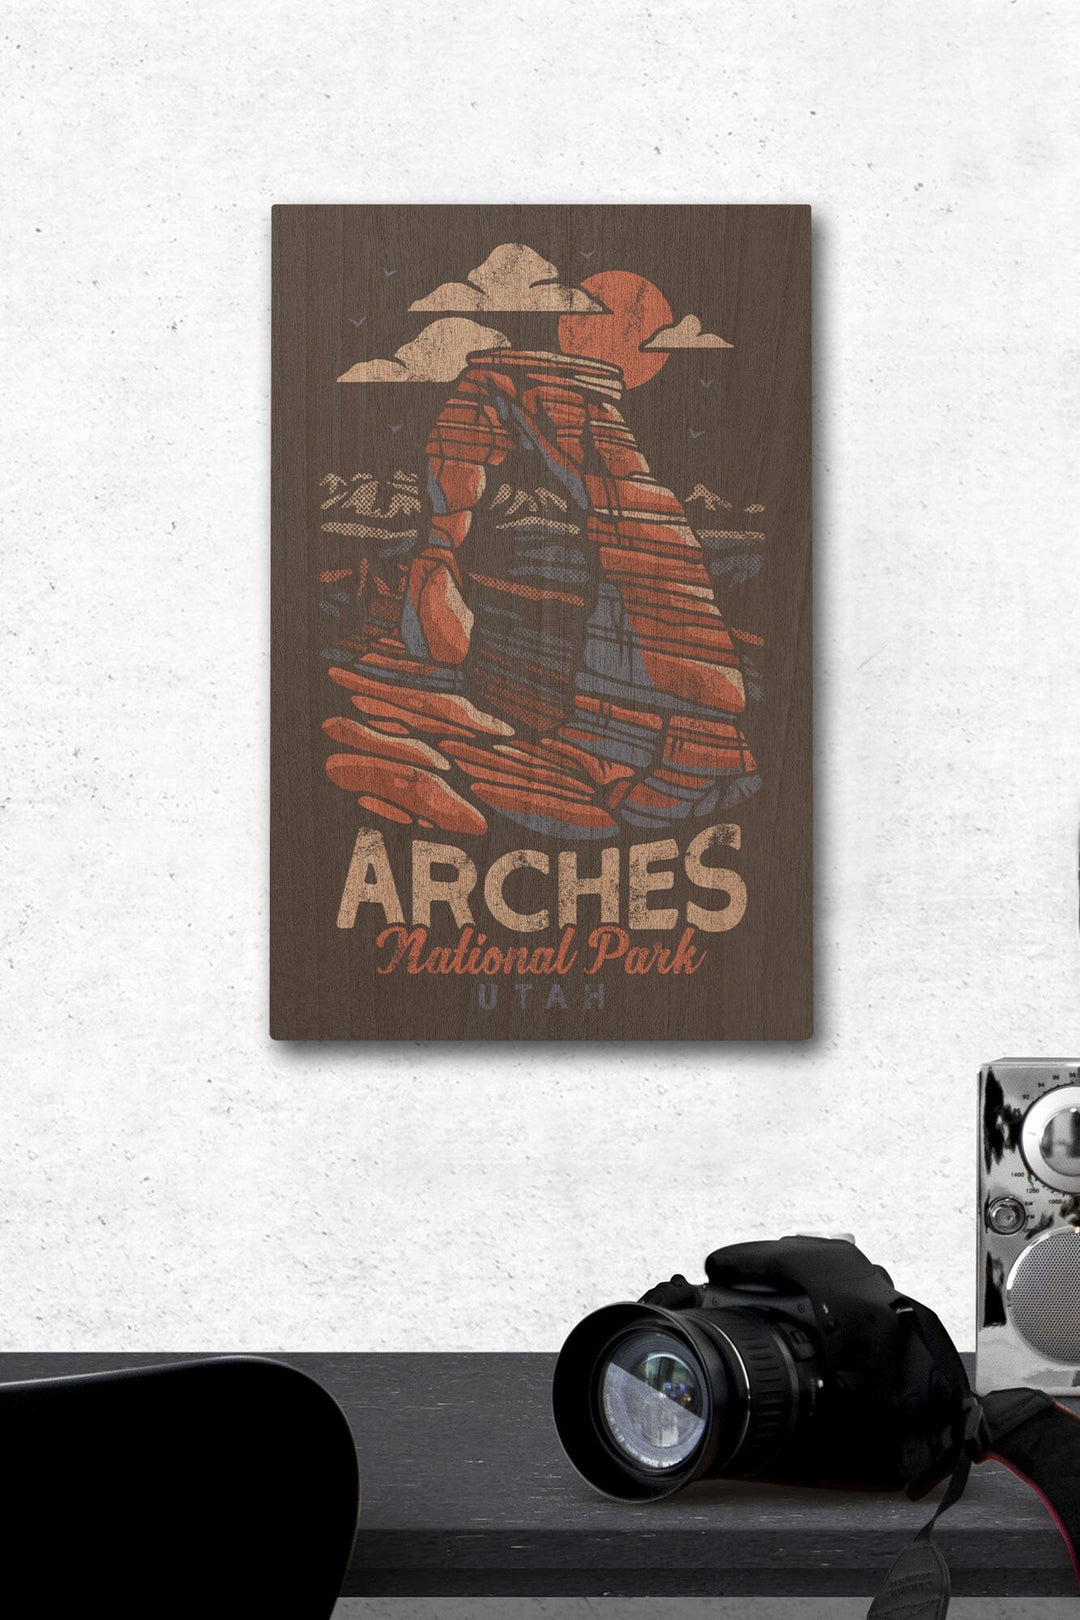 Arches National Park, Utah, Delicate Arch, Distressed Vector, Lantern Press Artwork, Wood Signs and Postcards Wood Lantern Press 12 x 18 Wood Gallery Print 